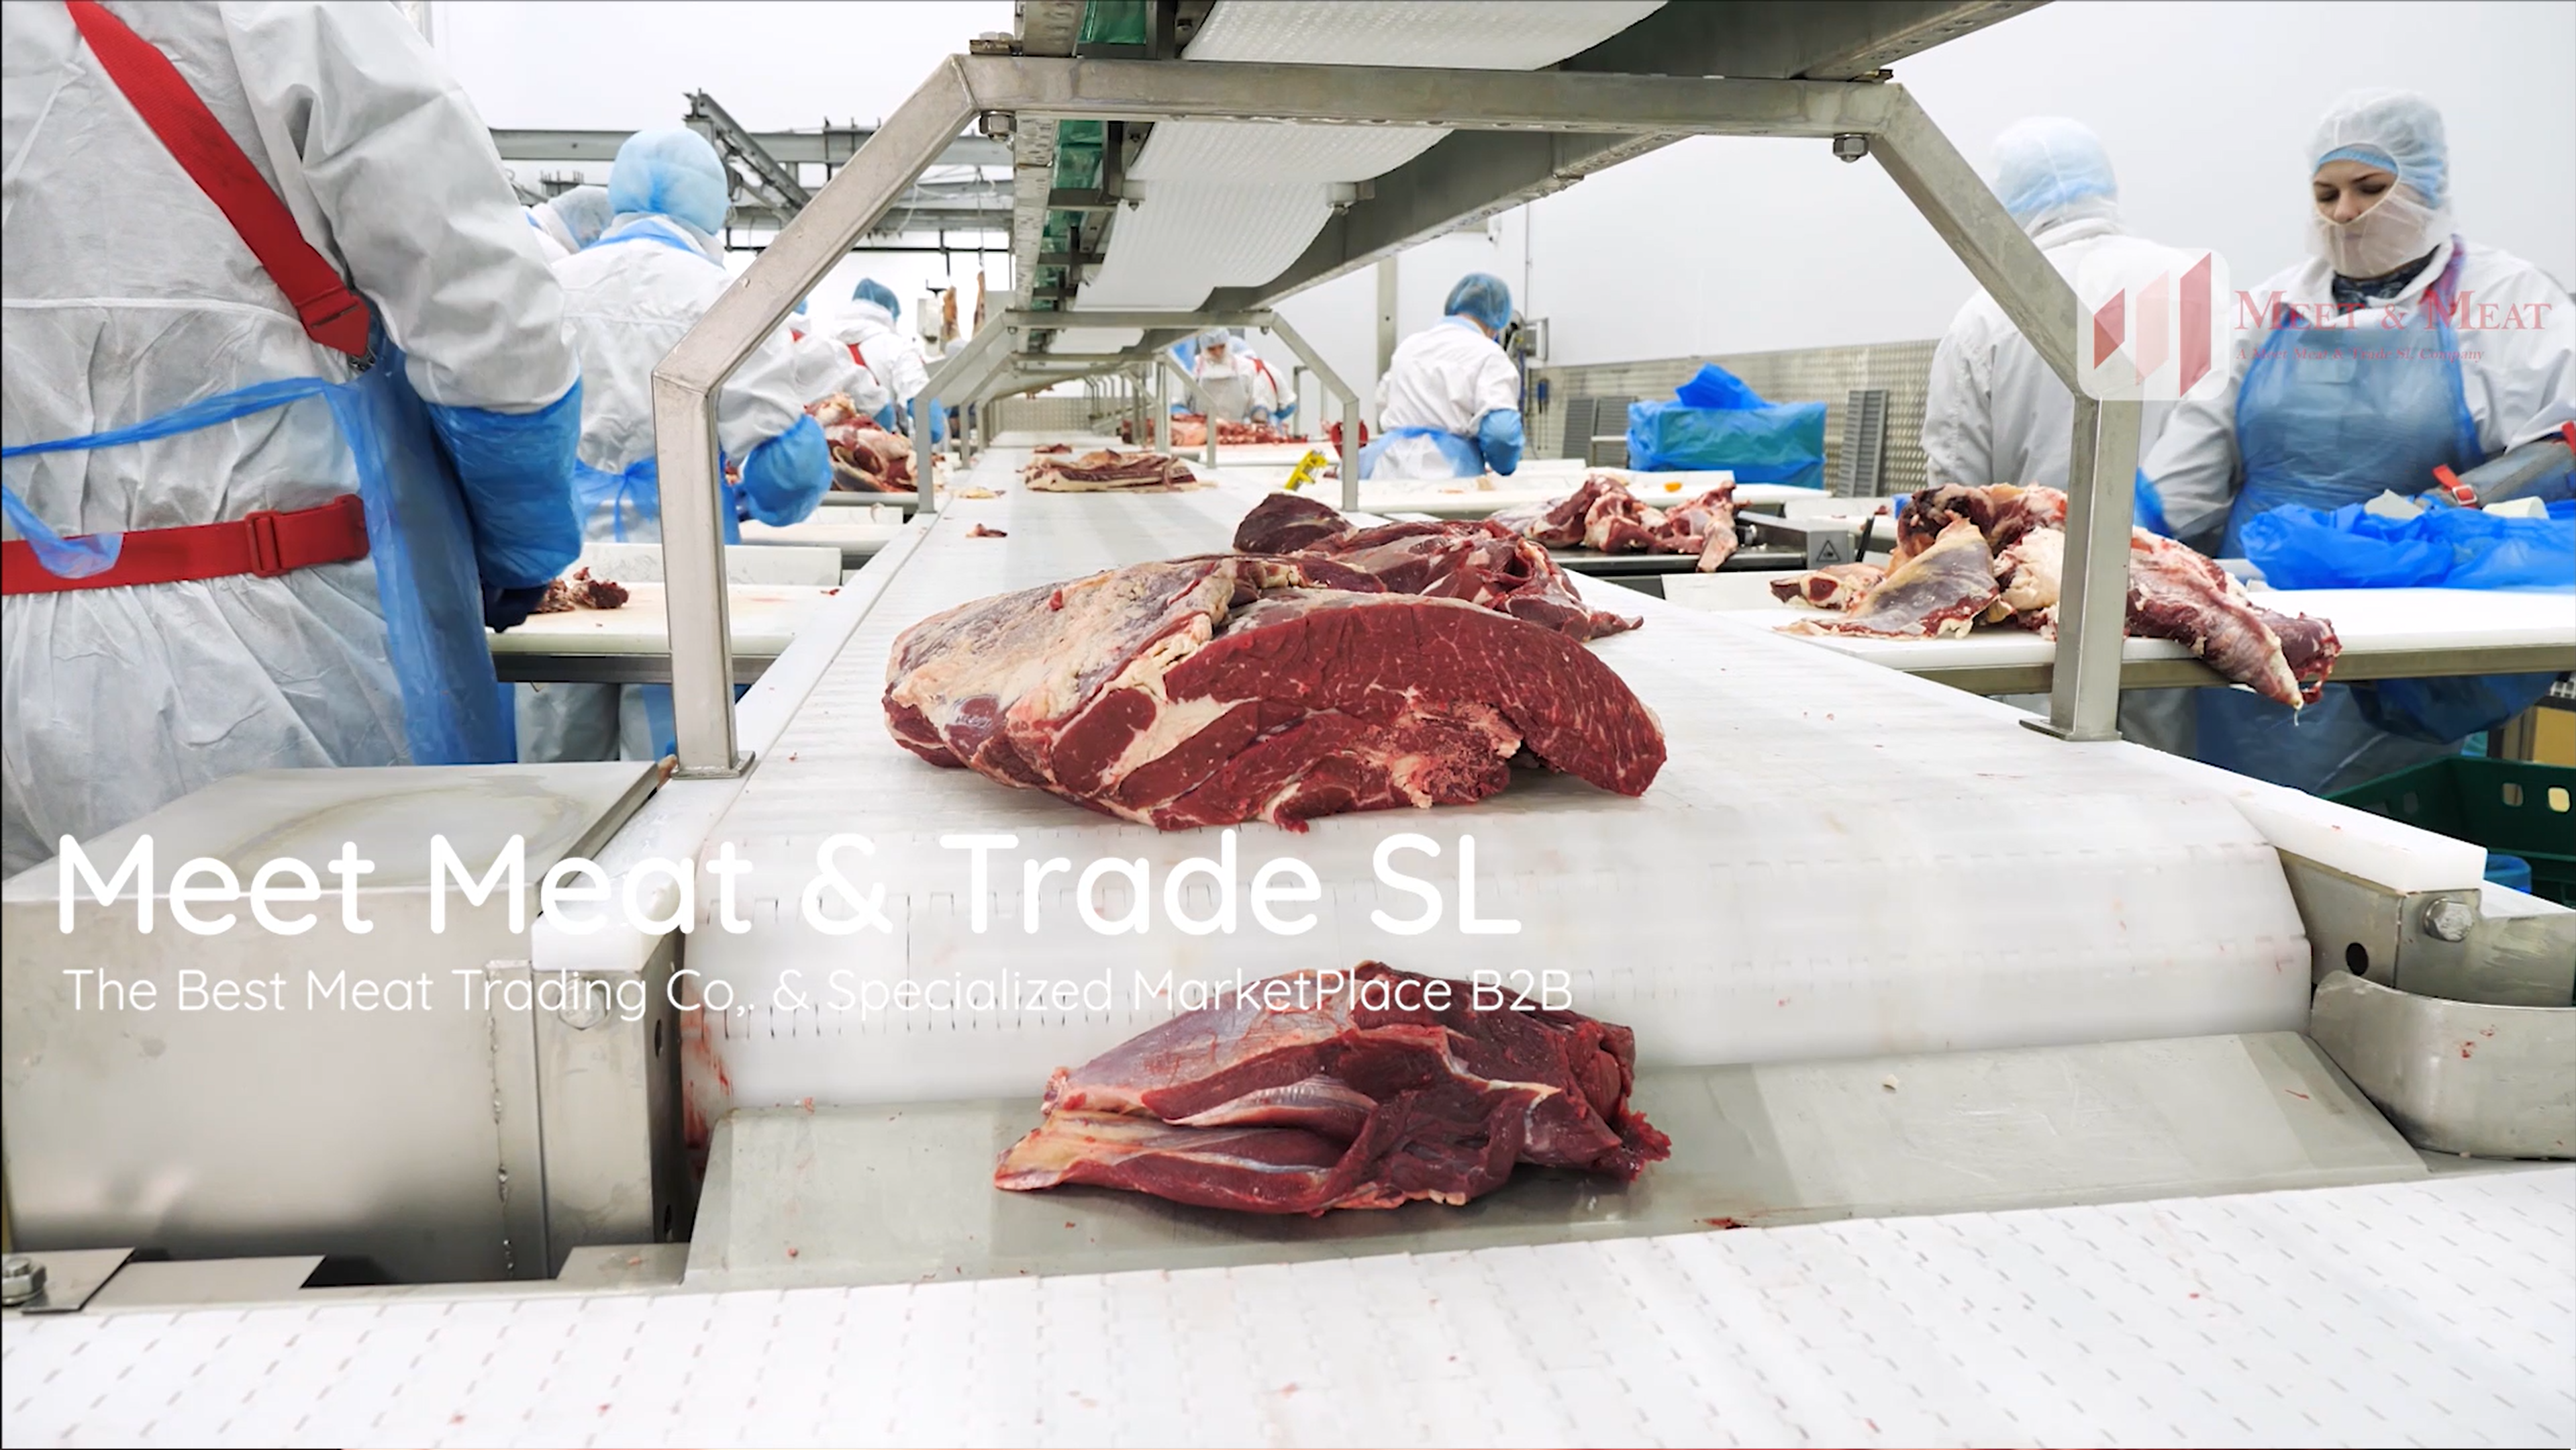 Meatup - B2B meat trading marketplace for China